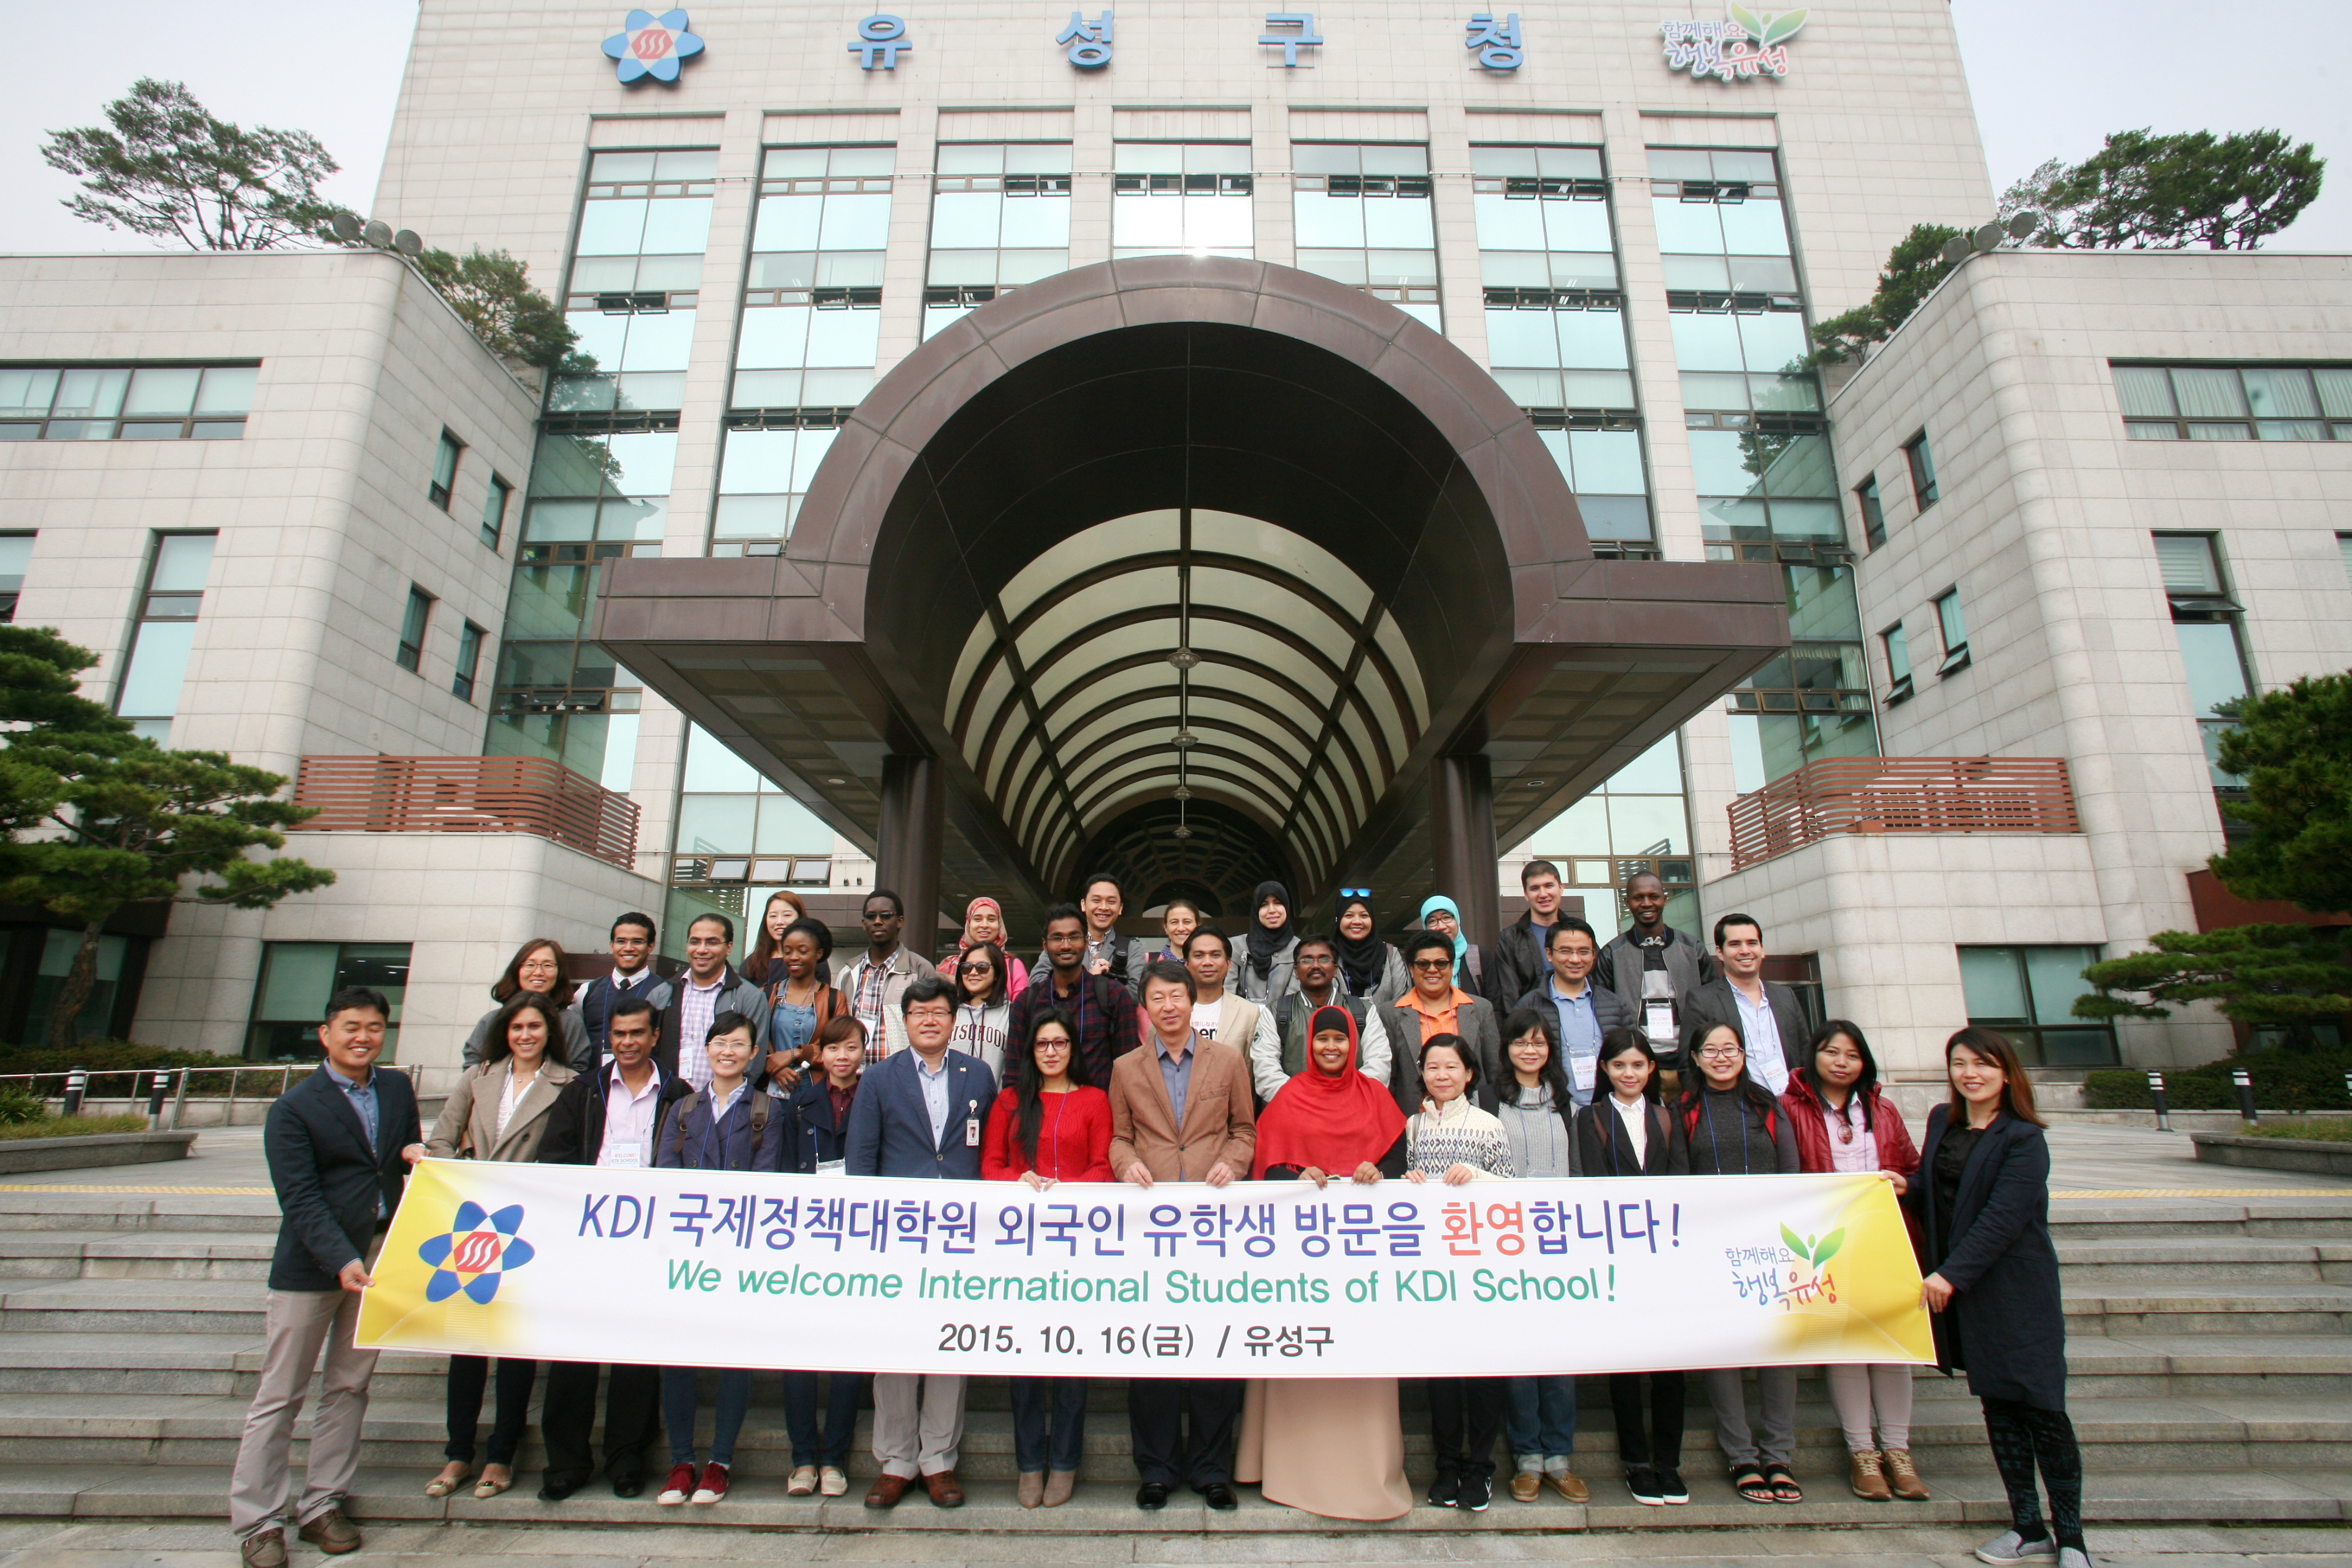 Visit to Daejeon Yuseong District and Daejeon City Hall